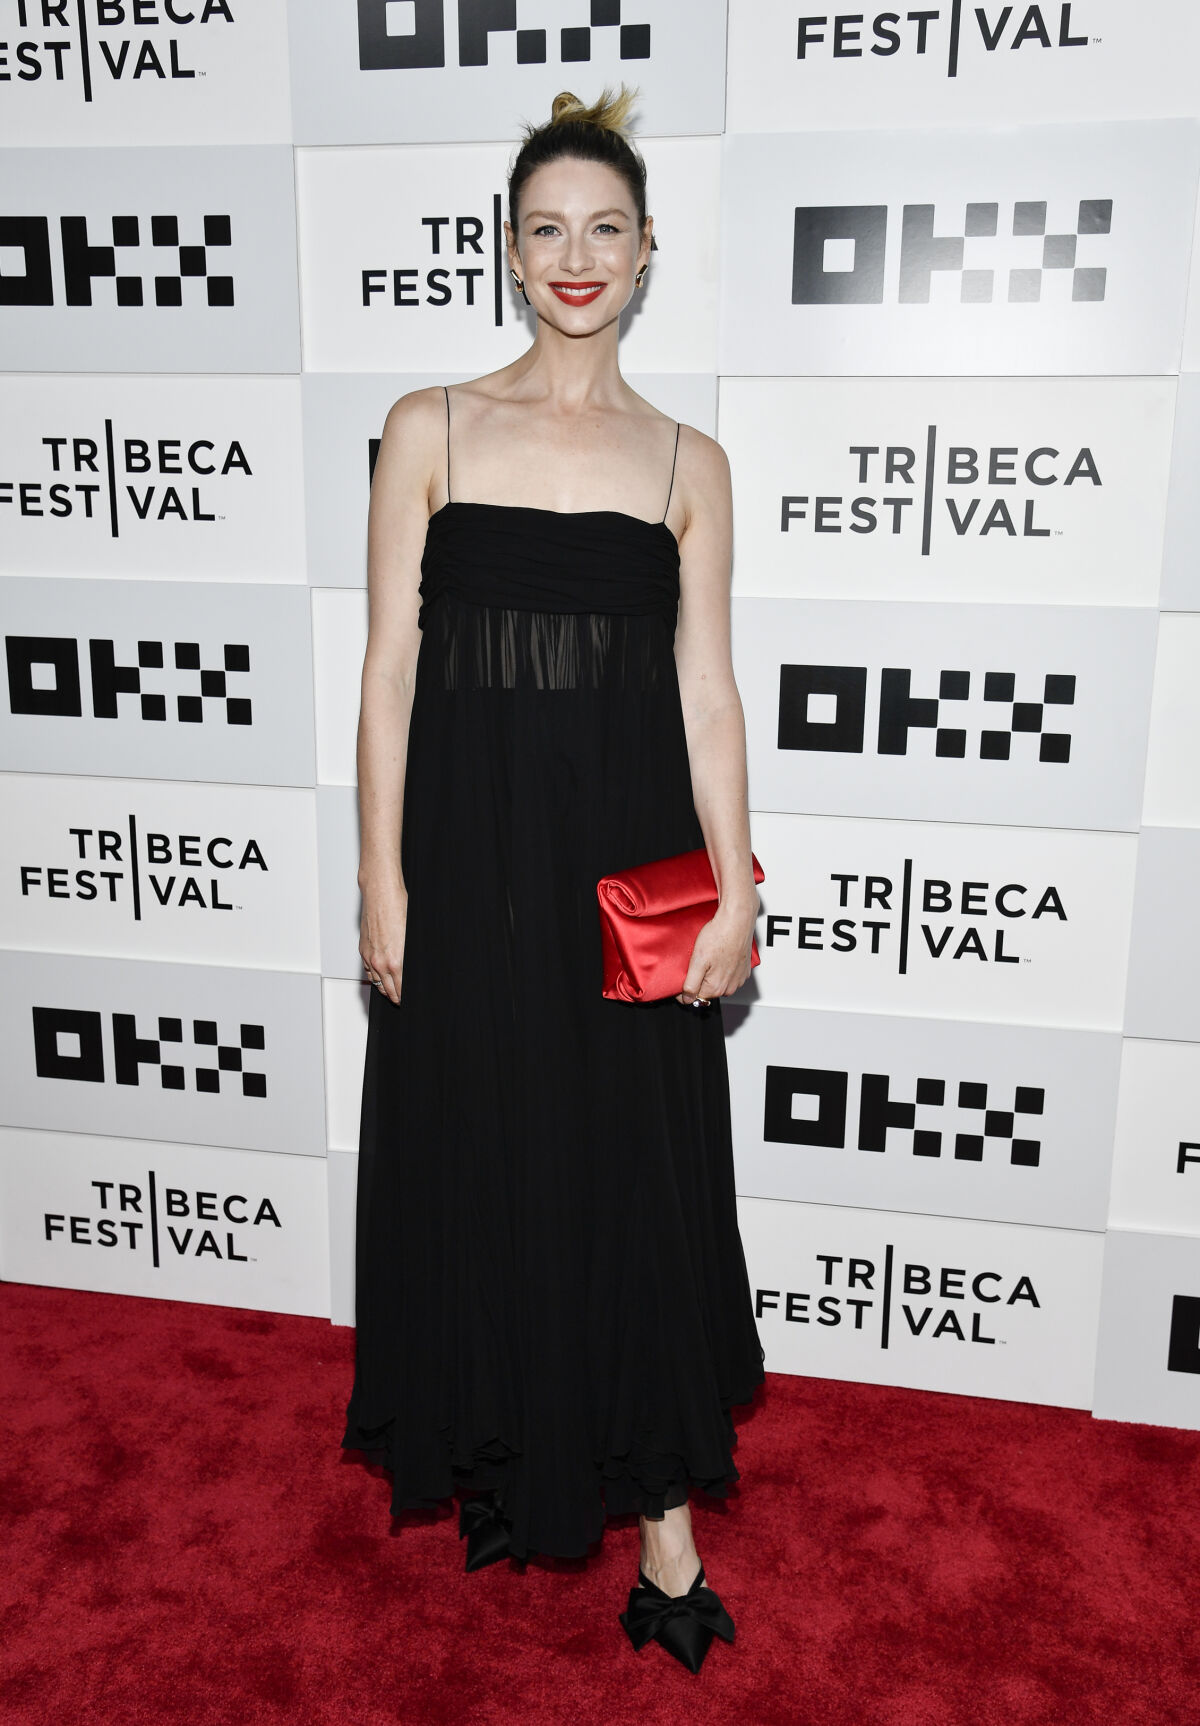 Caitriona Balfe attends the "Outlander" premiere during the 2023 Tribeca Festival at BMCC Theater on June 09, 2023 in New York City.